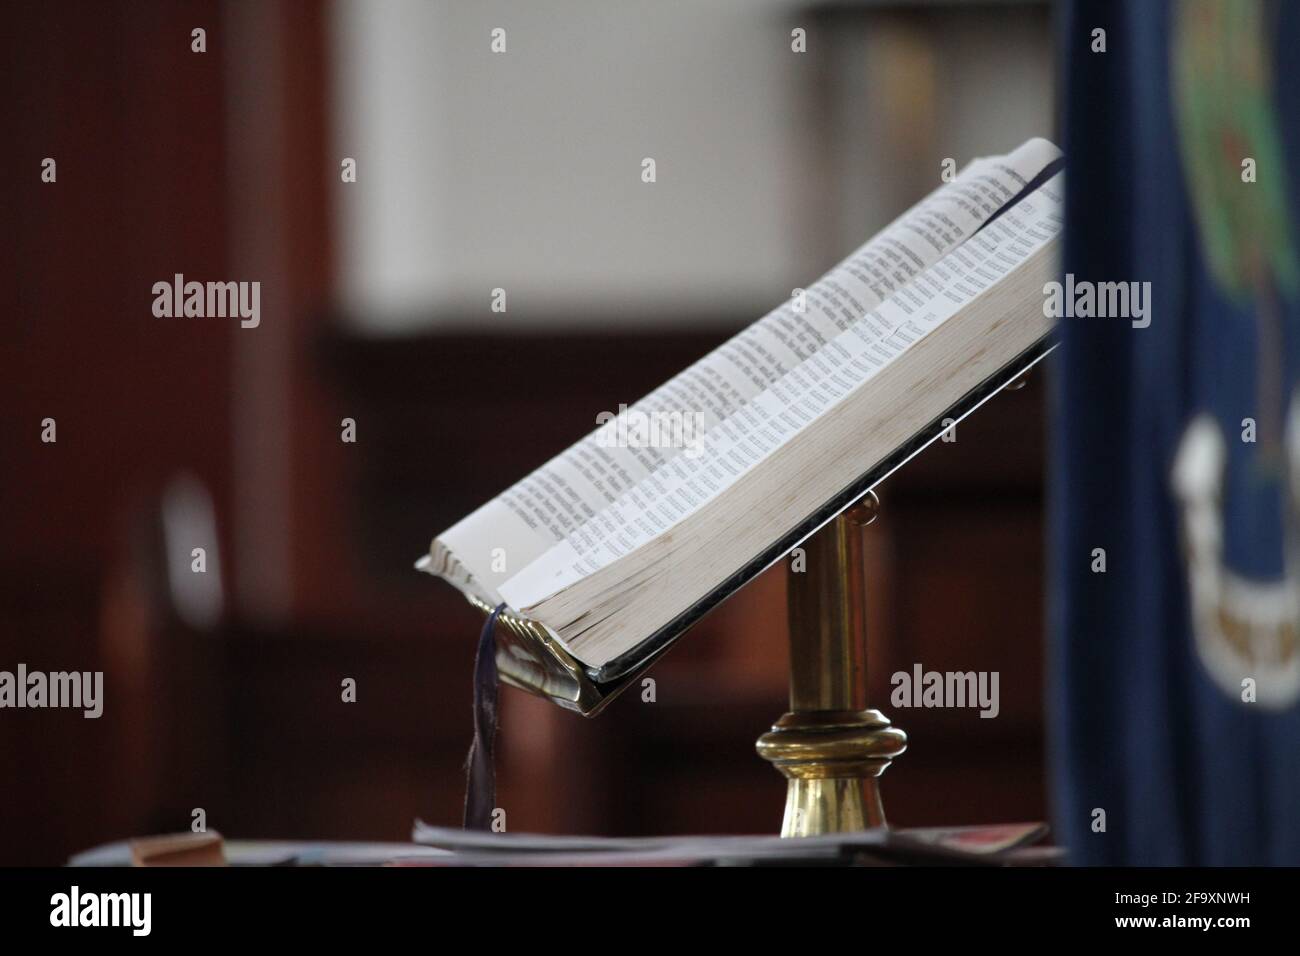 The Open Bible at the front of Salop Chapel in Liverpool England Stock Photo